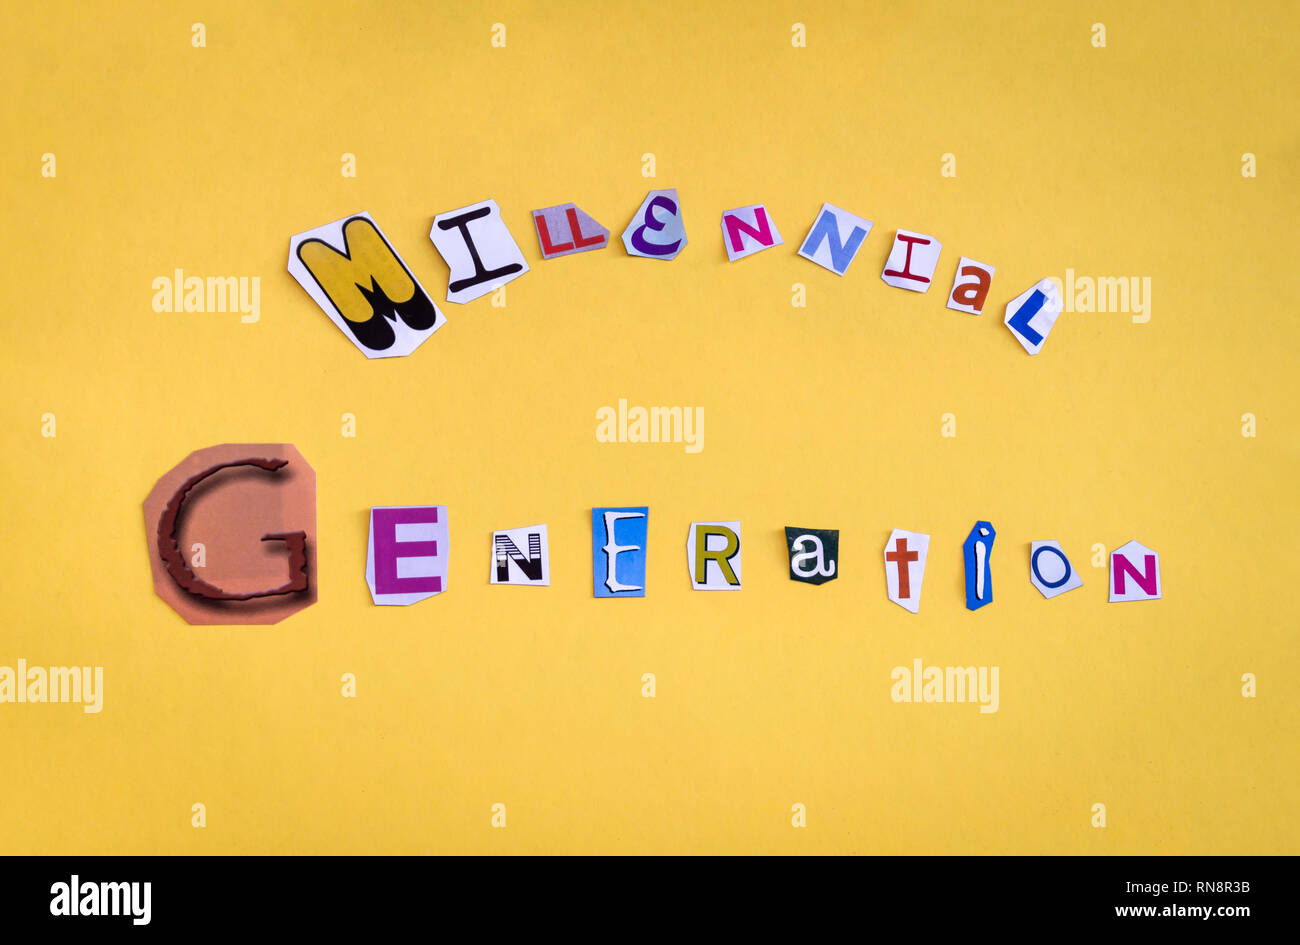 Words Millennial Generation formed with cut out letters. Millennial generation, the young people of the media and digital technologies. Stock Photo